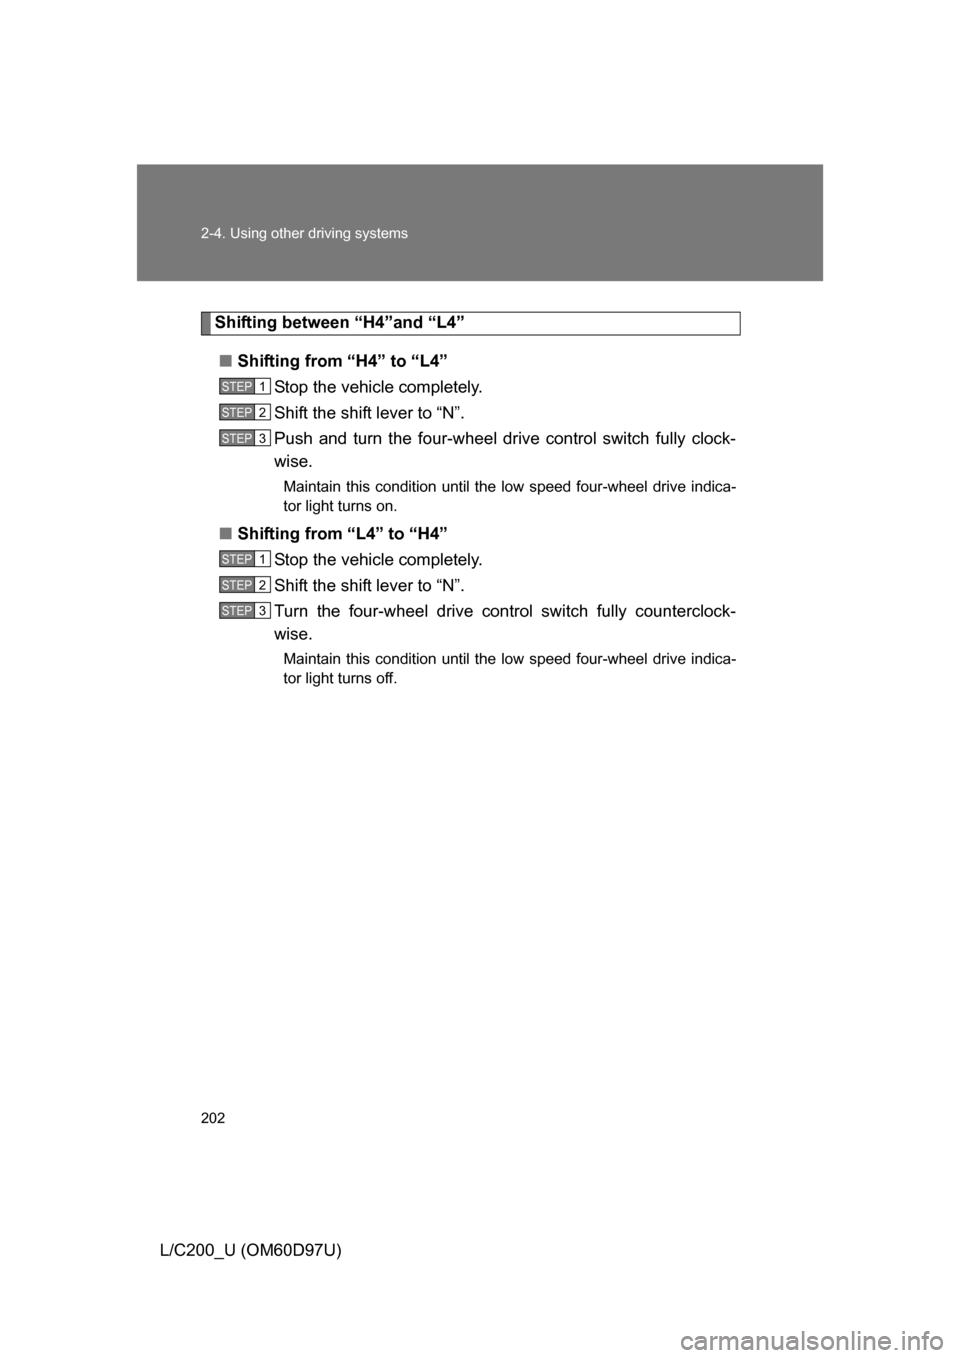 TOYOTA LAND CRUISER 2009 J200 Owners Manual 202 2-4. Using other driving systems
L/C200_U (OM60D97U)
Shifting between “H4”and “L4”■ Shifting from “H4” to “L4”
Stop the vehicle completely.
Shift the shift lever to “N”.
Push